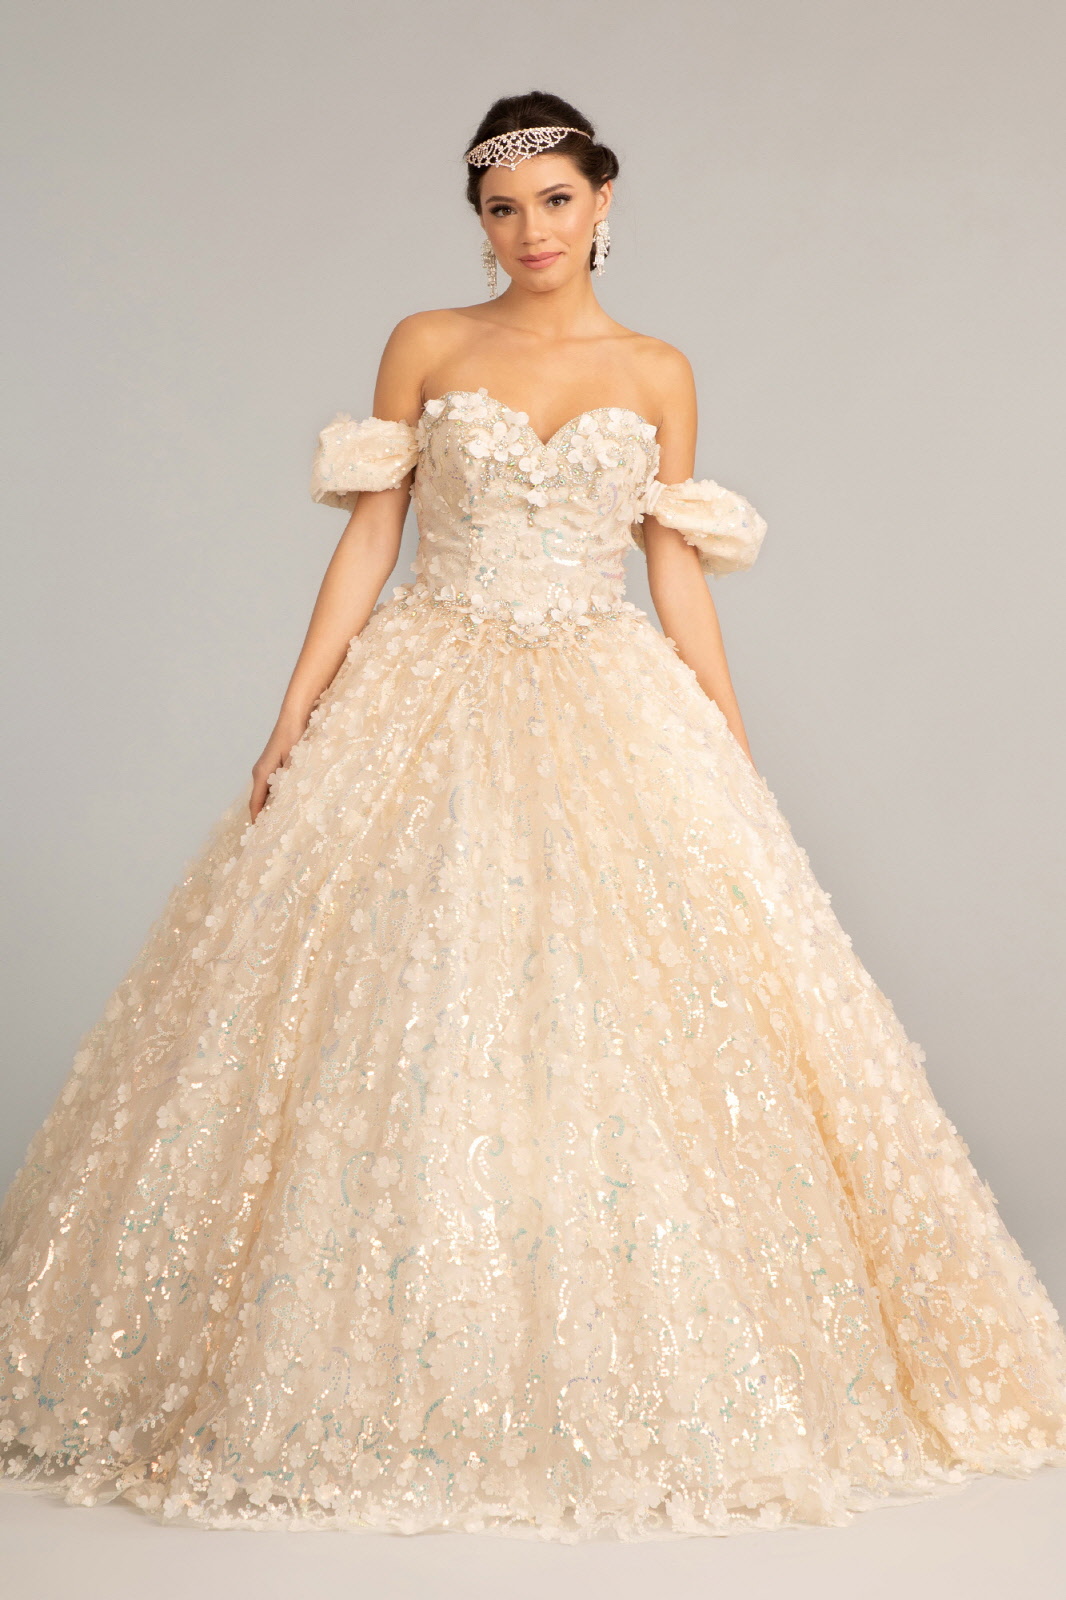 Jewel Embellished Mesh Quinceanera Ball Gown